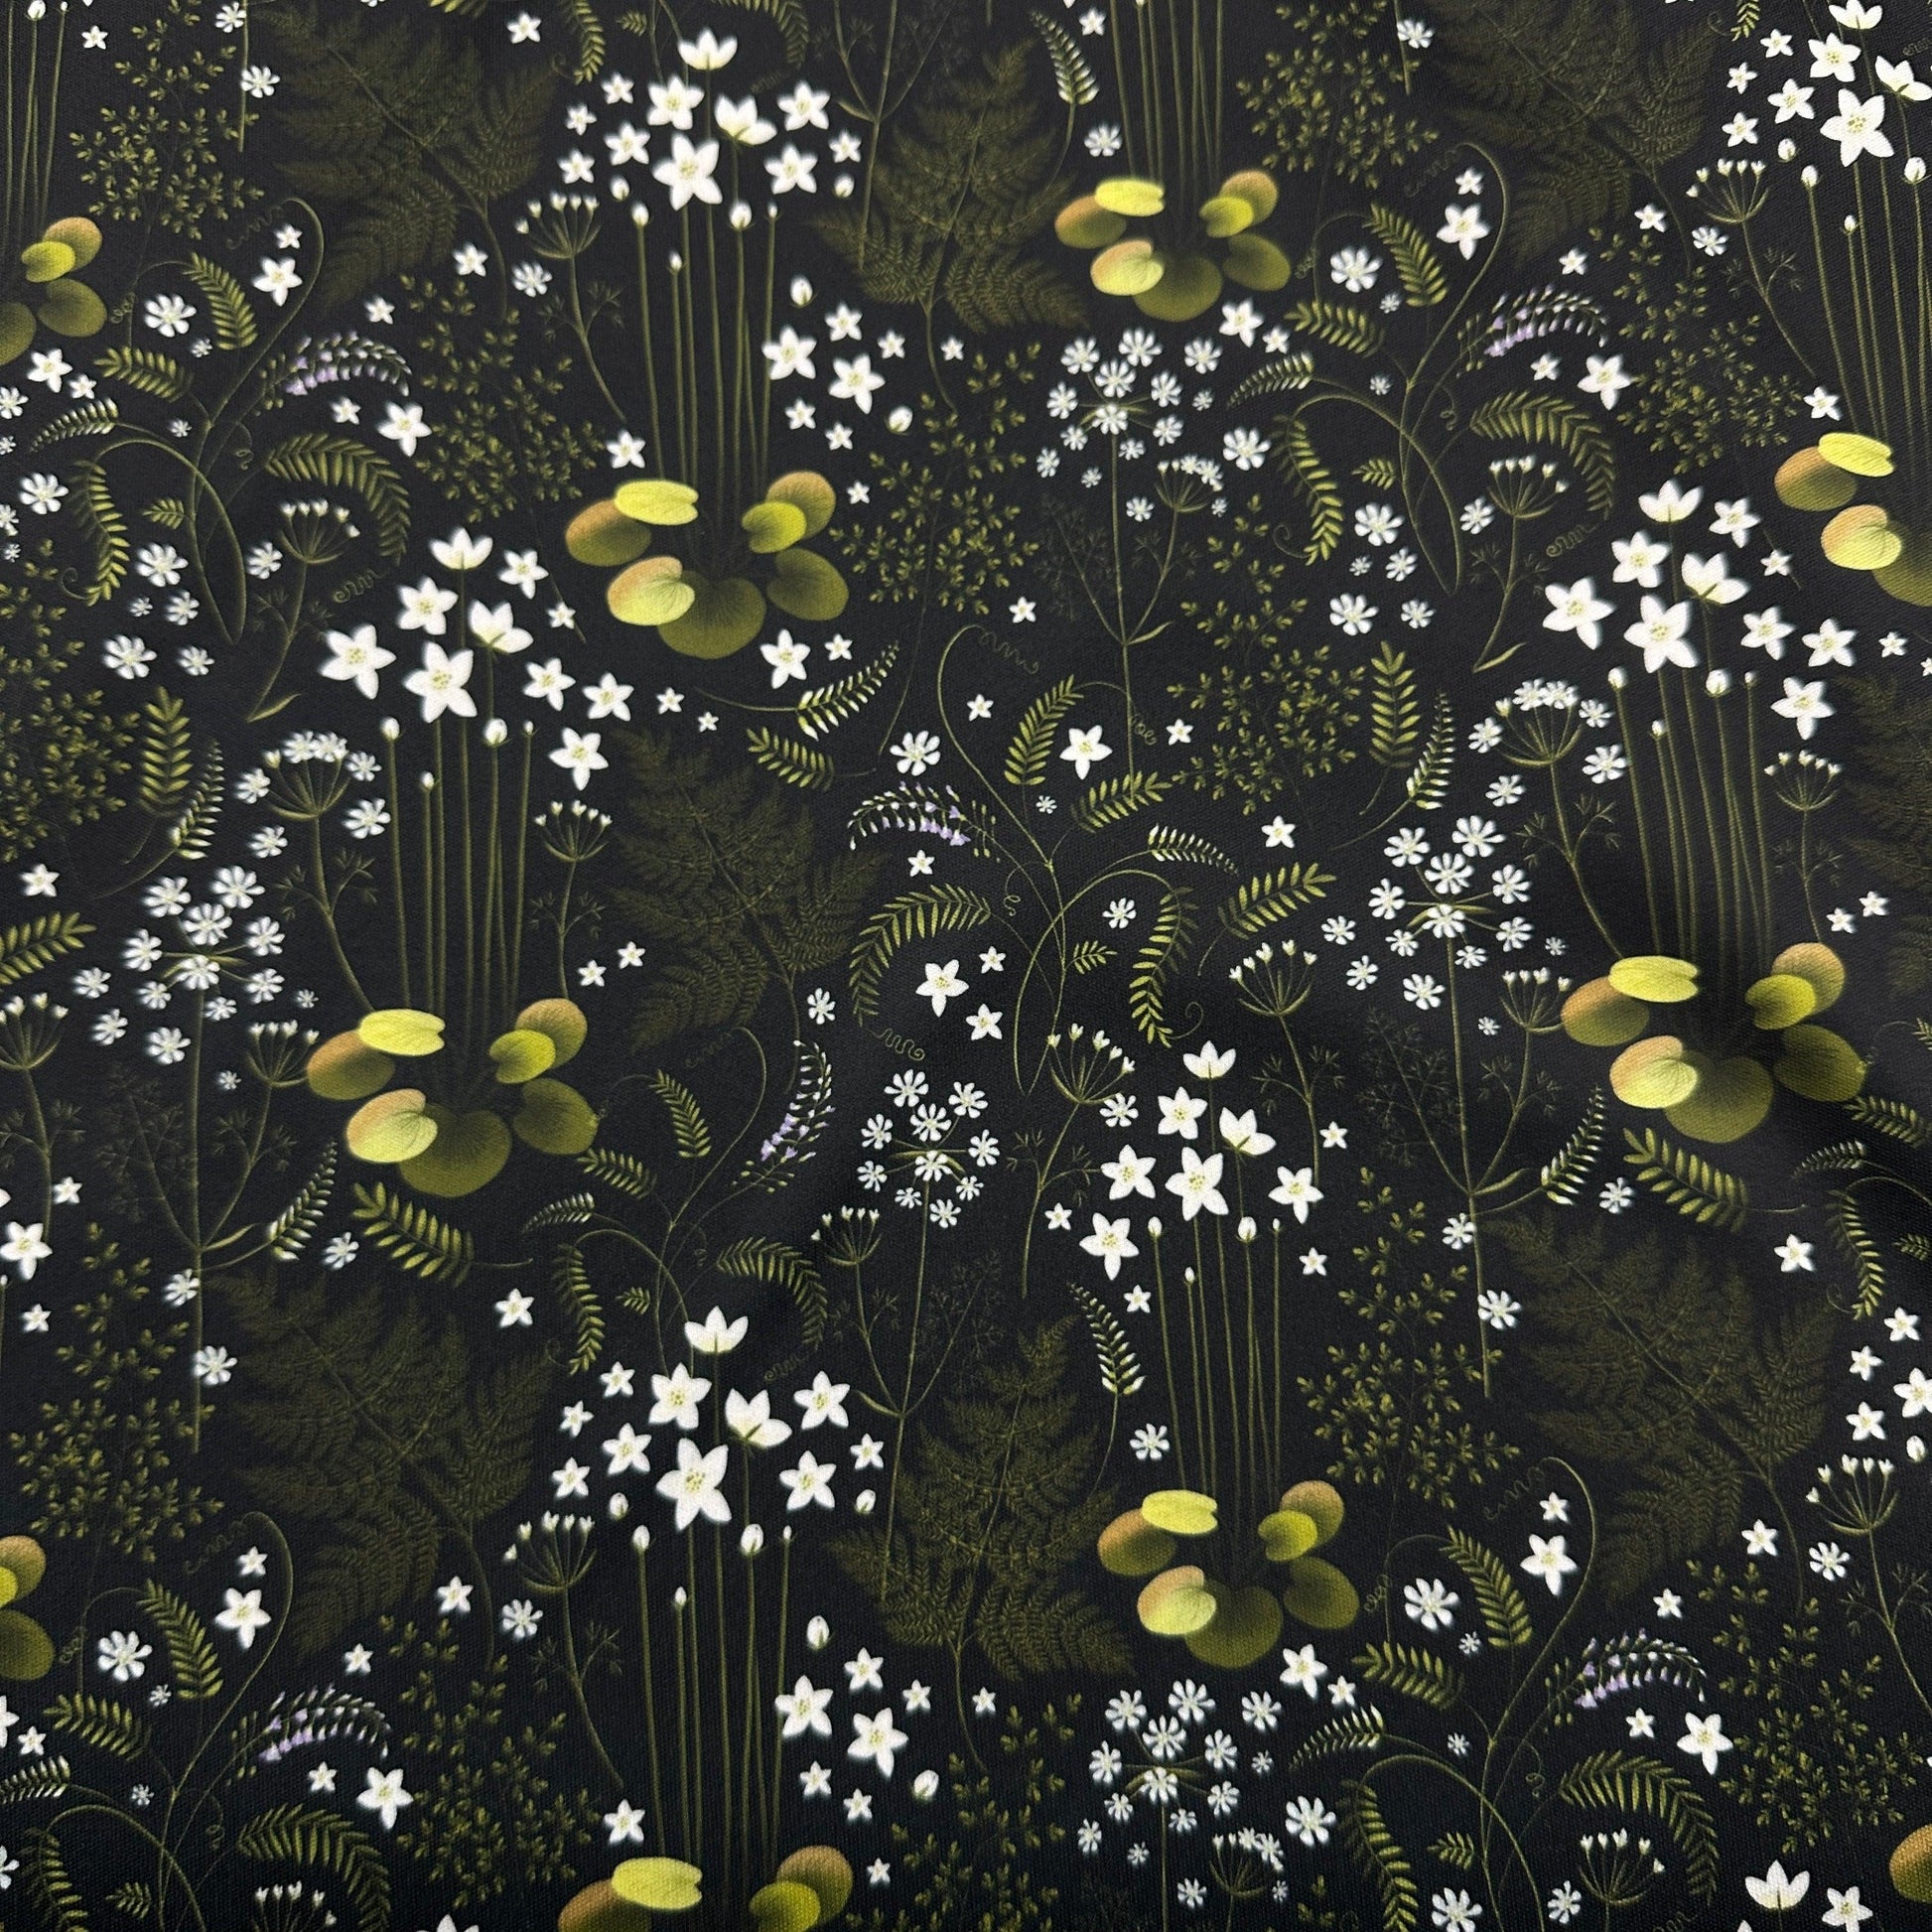 Ferns on Black 1 mil PUL Fabric - Made in the USA - Nature's Fabrics